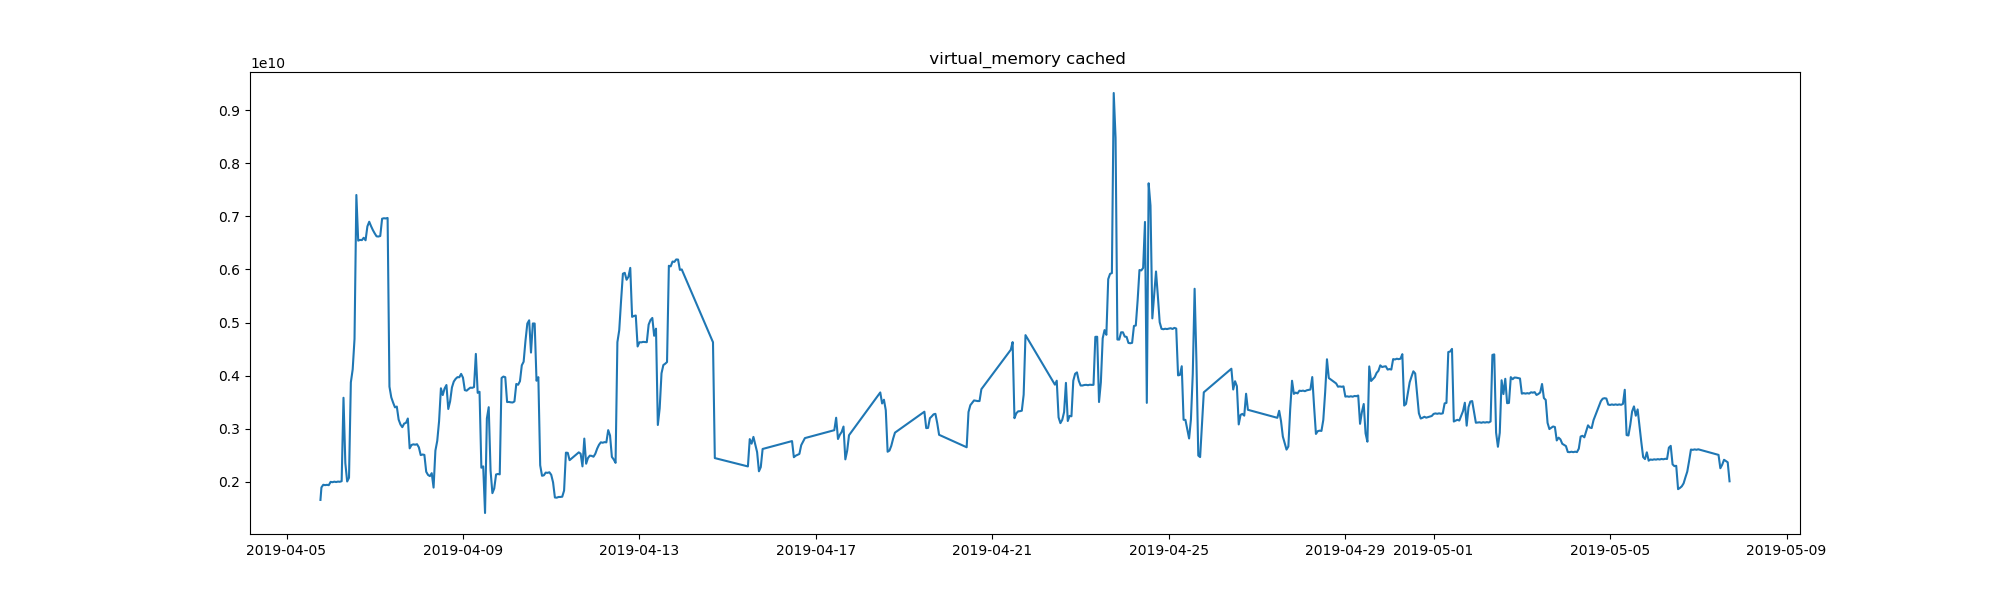 task-memory-virtual_memory-total-available-percent-used-free-active-inactive-buffers-cached.png